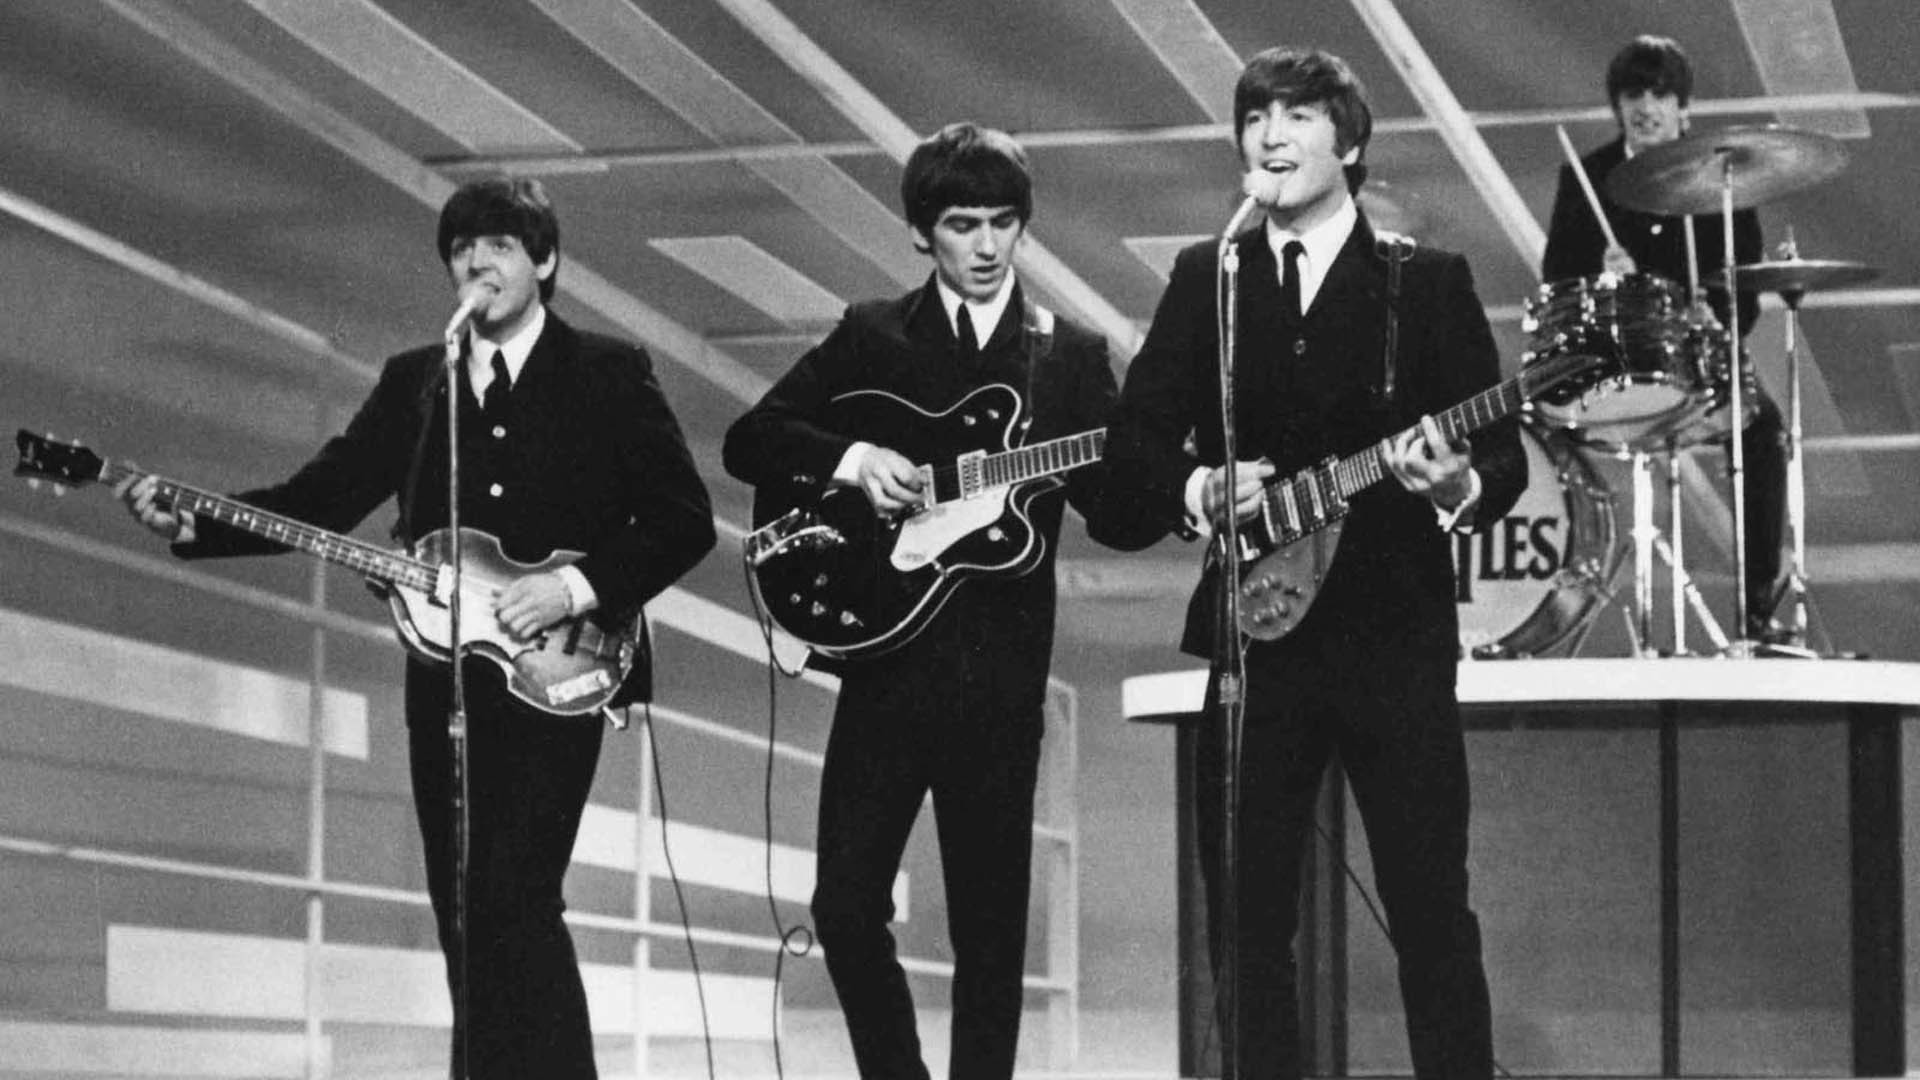 1920x1080 53 Years Ago Today - The Day the Beatles Changed the World